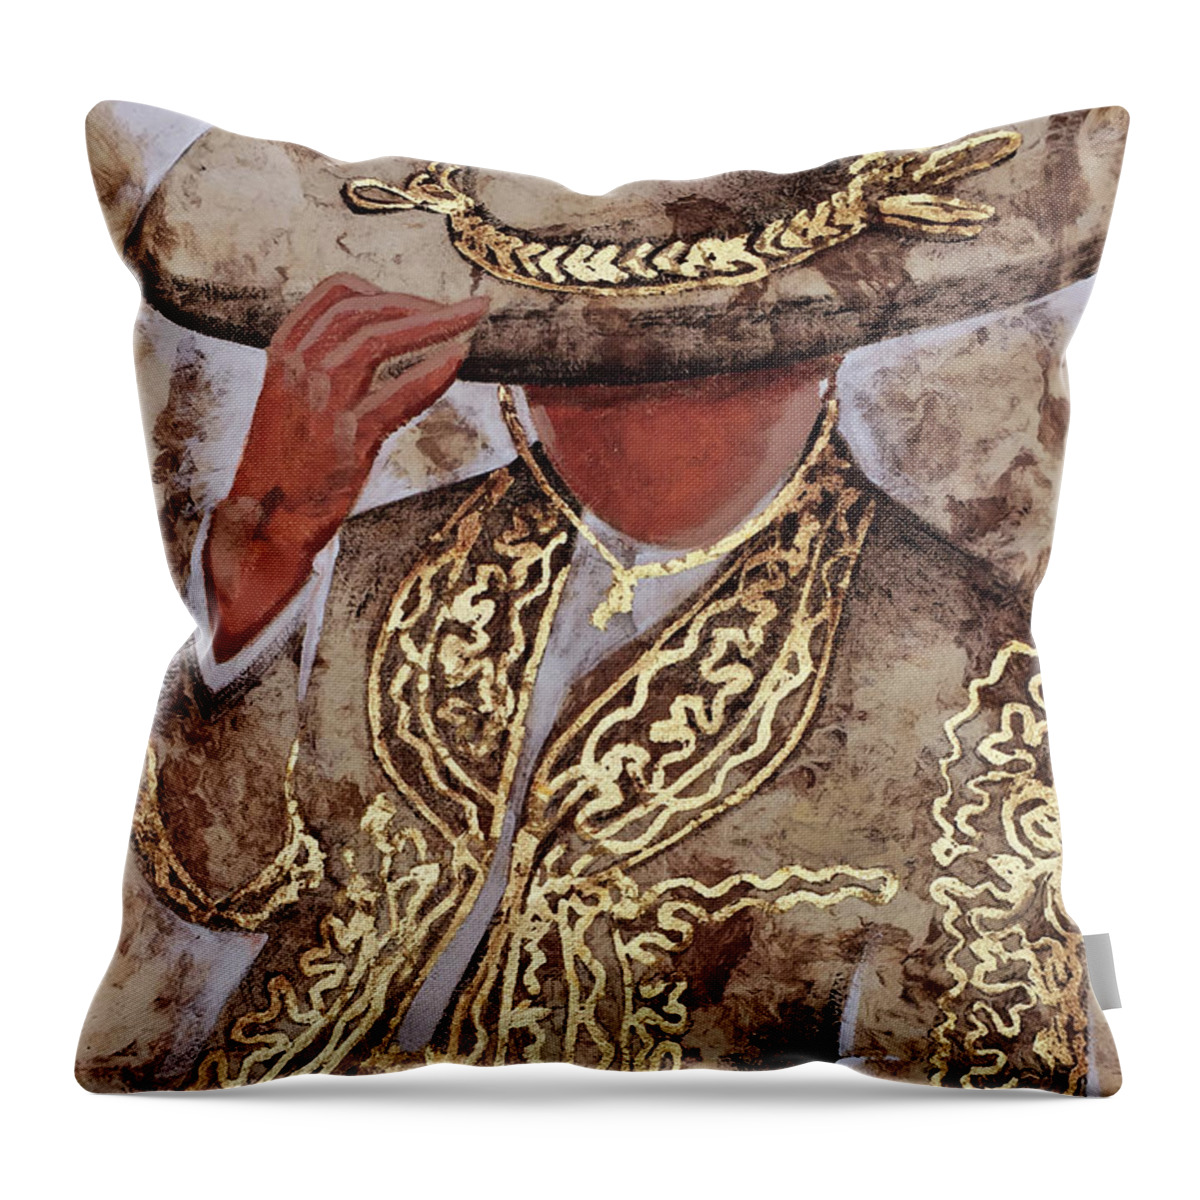 Charros Throw Pillow featuring the painting C H A R R O . G I R L by J U A N - O A X A C A